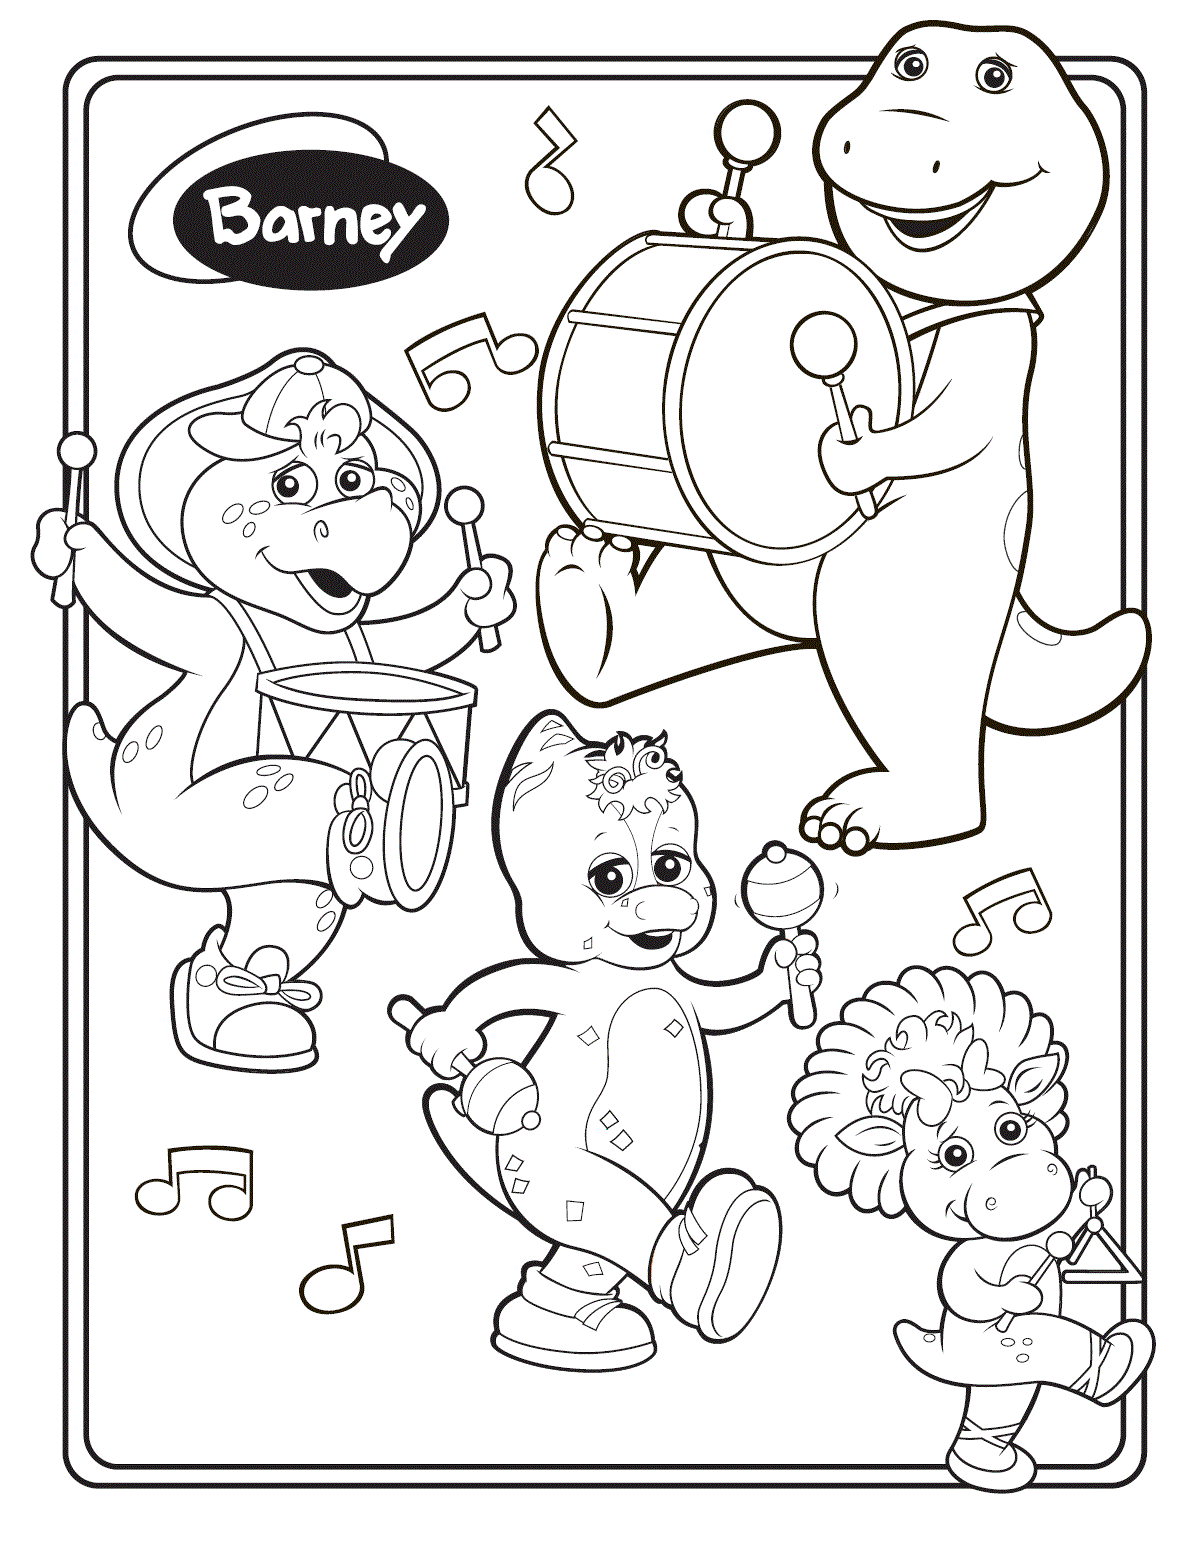 Barney and Friends Coloring Pages TV Film Barney Printable 2020 00689 Coloring4free